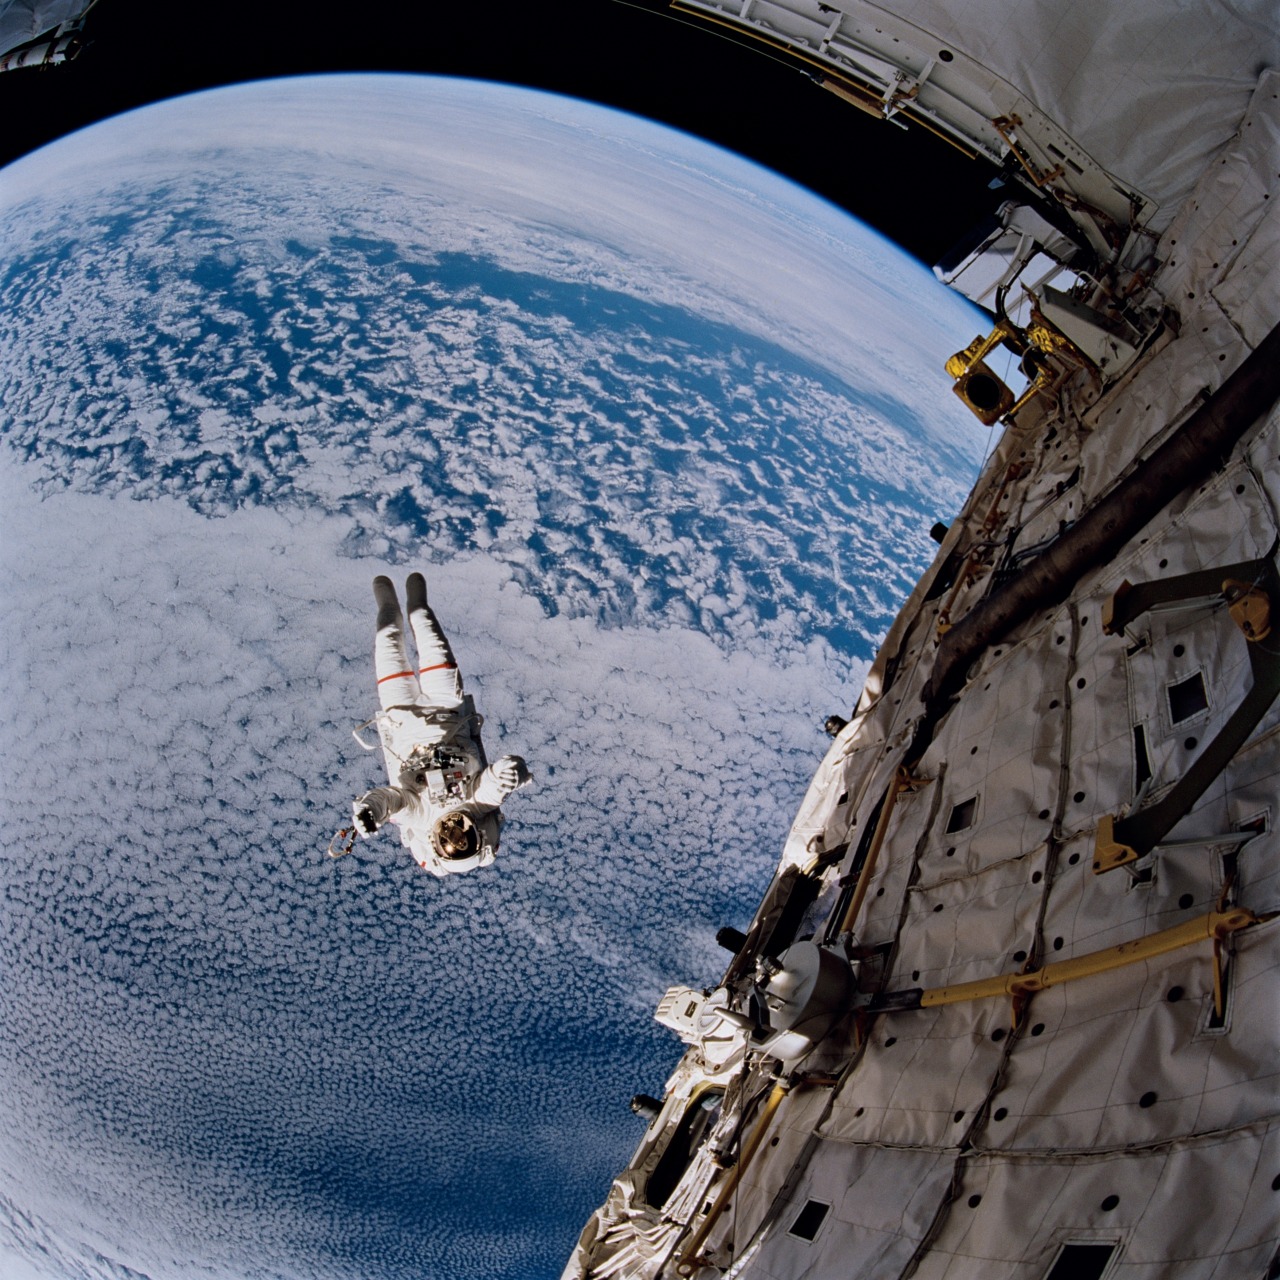 gunsandposes-history:  Spacewalk, 1994, during the STS-64 mission of the Space Shuttle